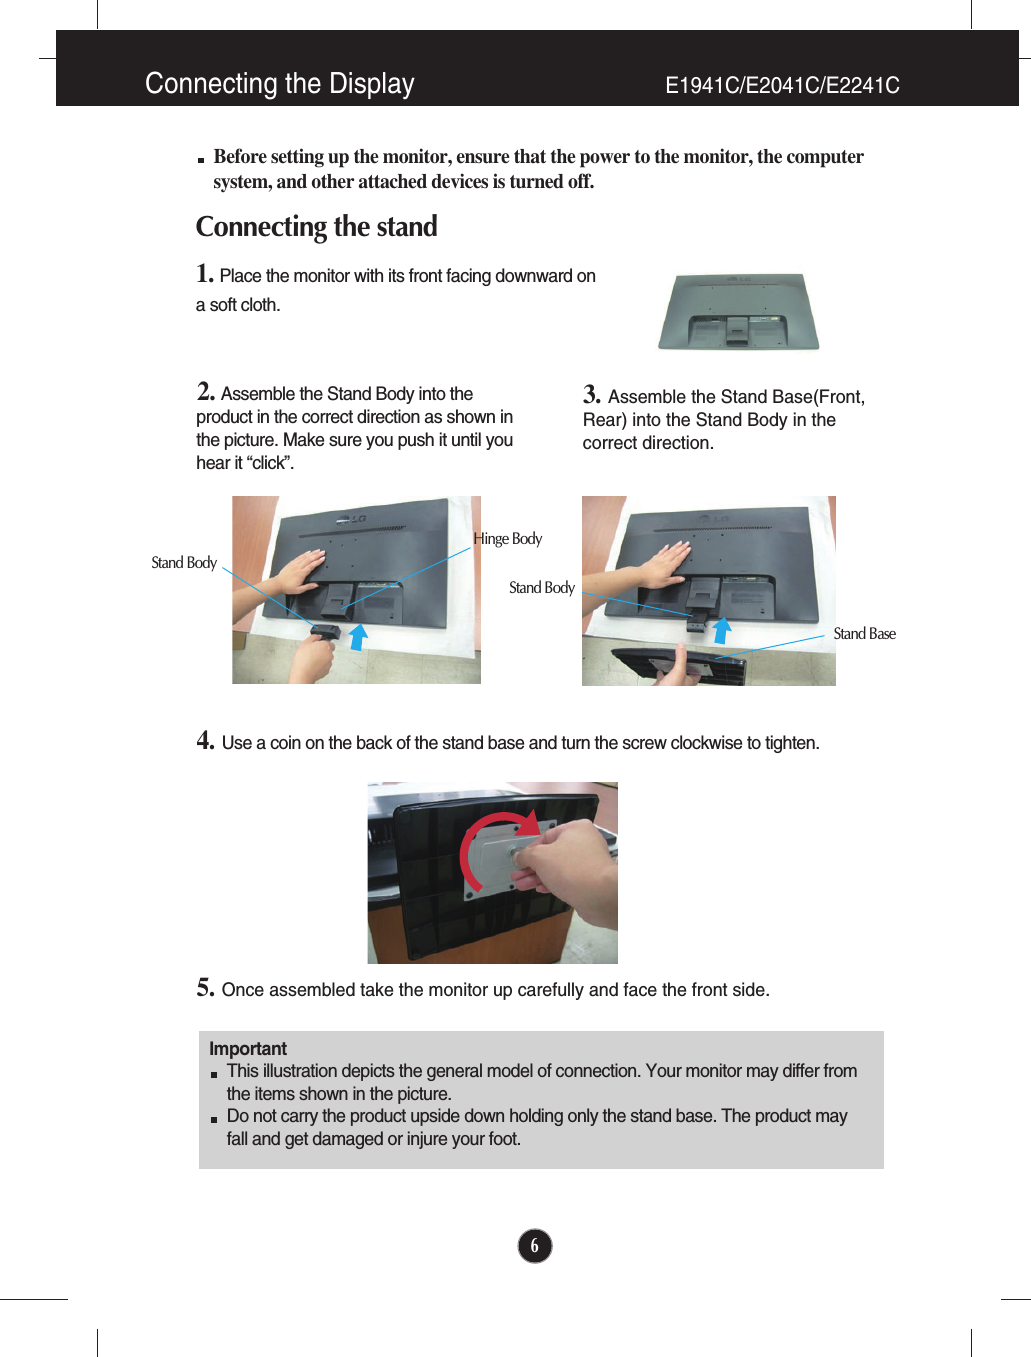 6Before setting up the monitor, ensure that the power to the monitor, the computersystem, and other attached devices is turned off.Connecting the stand 1. Place the monitor with its front facing downward on a soft cloth.2. Assemble the Stand Body into theproduct in the correct direction as shown inthe picture. Make sure you push it until youhear it “click”.3. Assemble the Stand Base(Front,Rear) into the Stand Body in thecorrect direction.4. Use a coin on the back of the stand base and turn the screw clockwise to tighten.5. Once assembled take the monitor up carefully and face the front side.ImportantThis illustration depicts the general model of connection. Your monitor may differ fromthe items shown in the picture.Do not carry the product upside down holding only the stand base. The product mayfall and get damaged or injure your foot.Stand BodyHinge BodyStand BodyStand BaseConnecting the Display E1941C/E2041C/E2241C